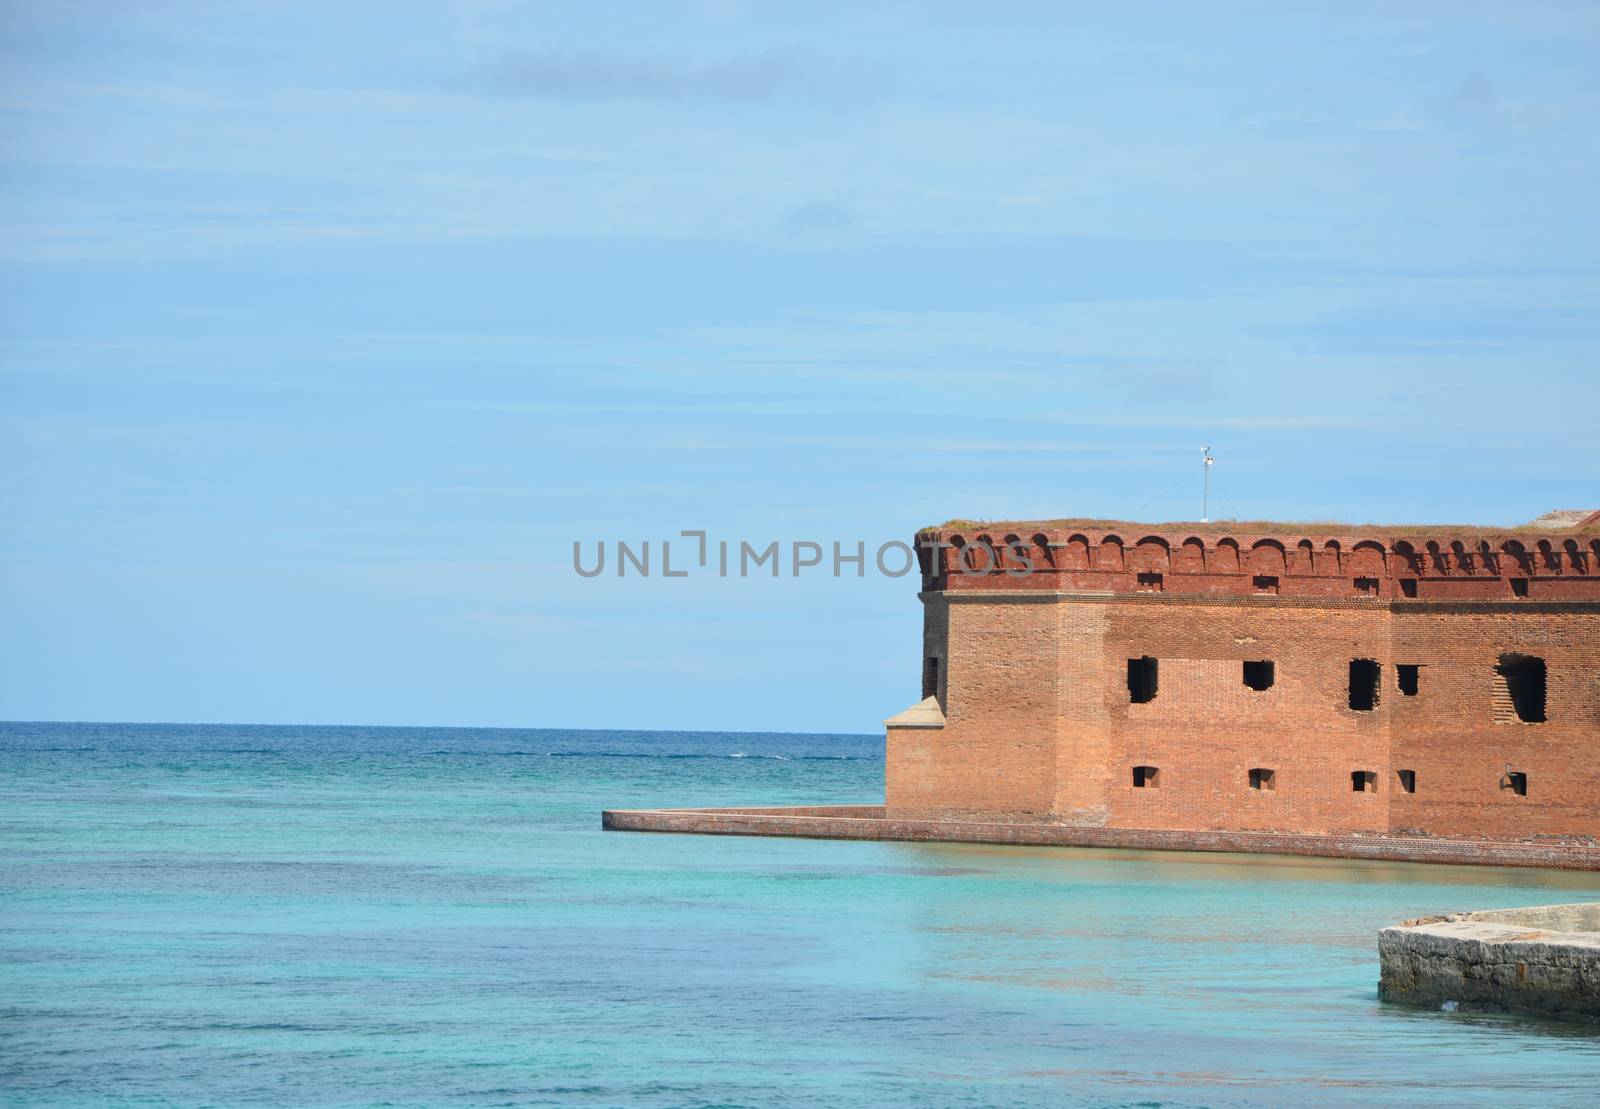 An old fort located on the island of Dry. Tortugas. This is off the coast of Florida.It served as fort and prison during the Civil War.